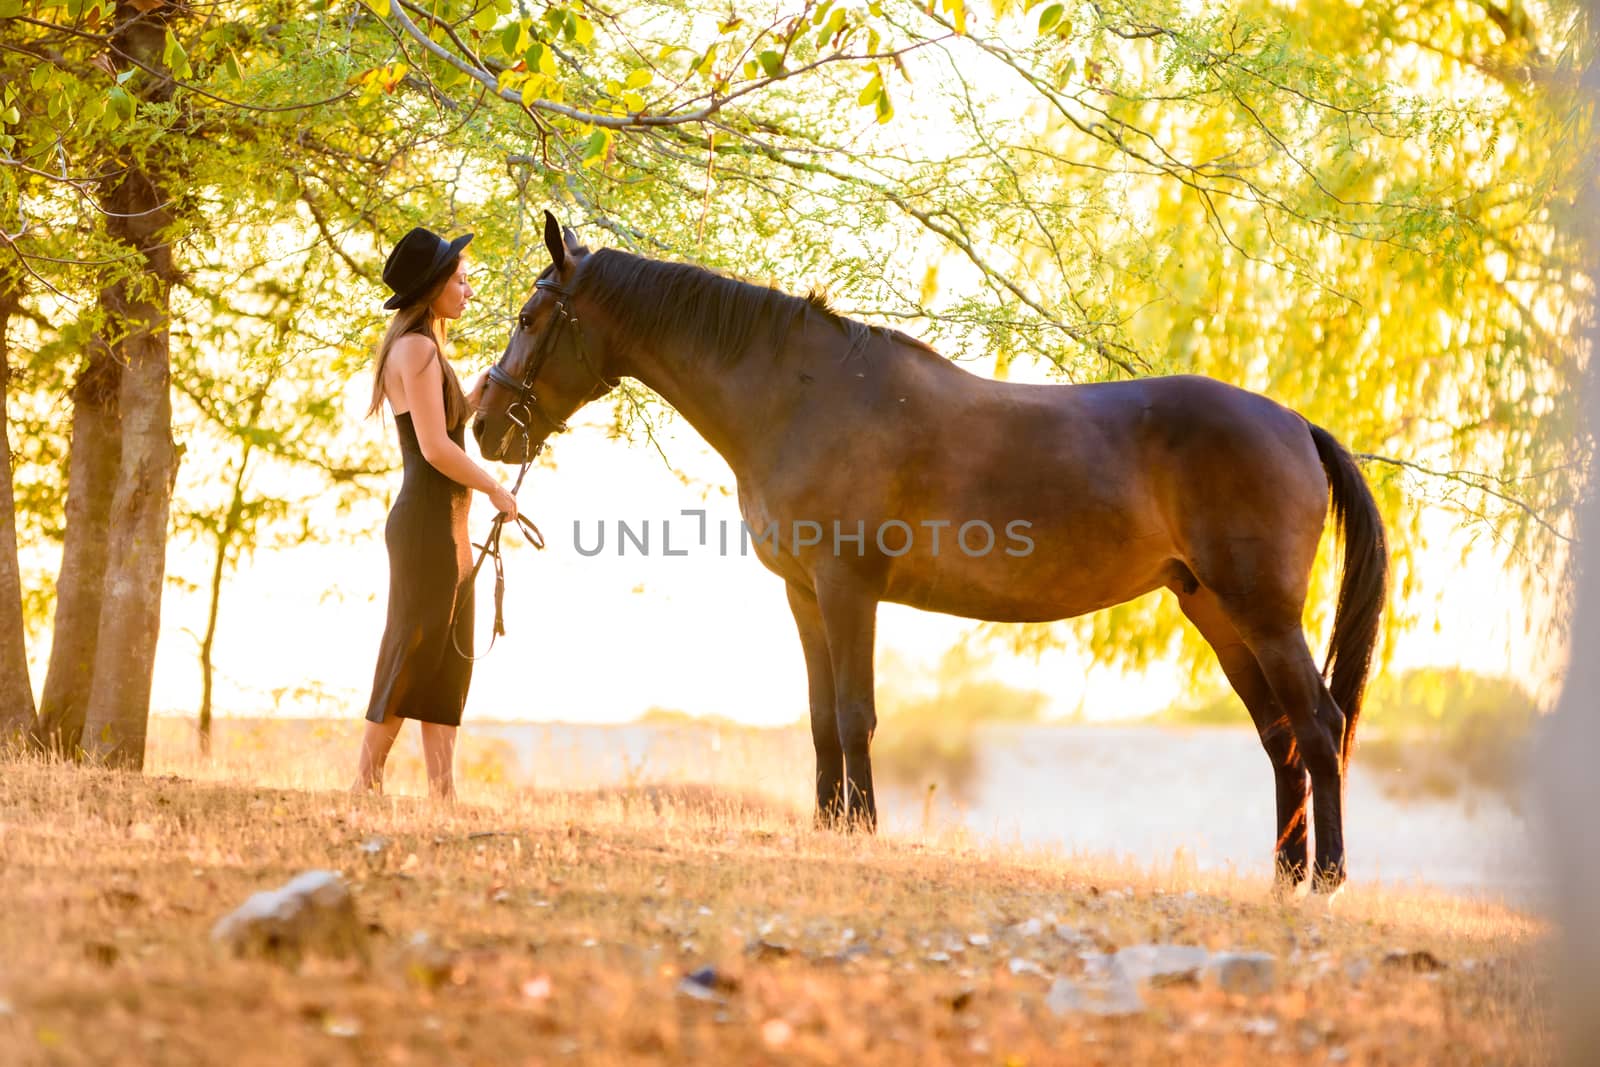 Beautiful girl stands with a horse in the forest at sunset with beautiful backlighting